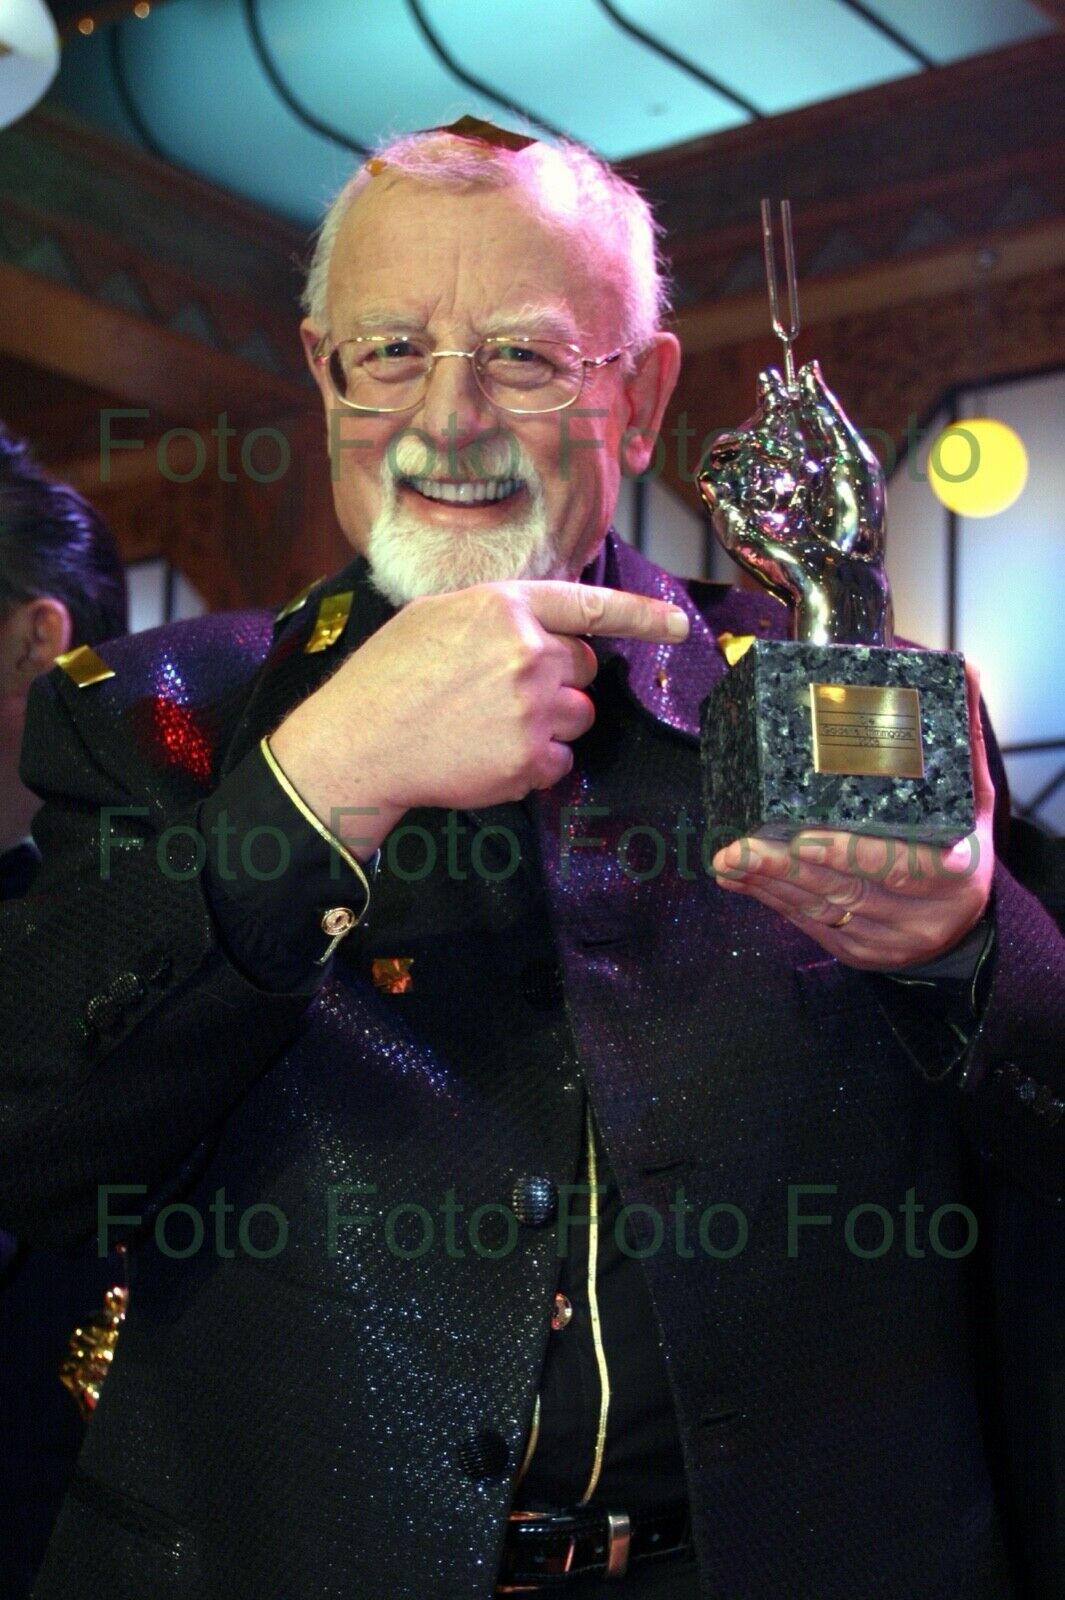 Roger Whittaker England Musik Foto 20 x 30 cm ohne Autogramm (Be-19